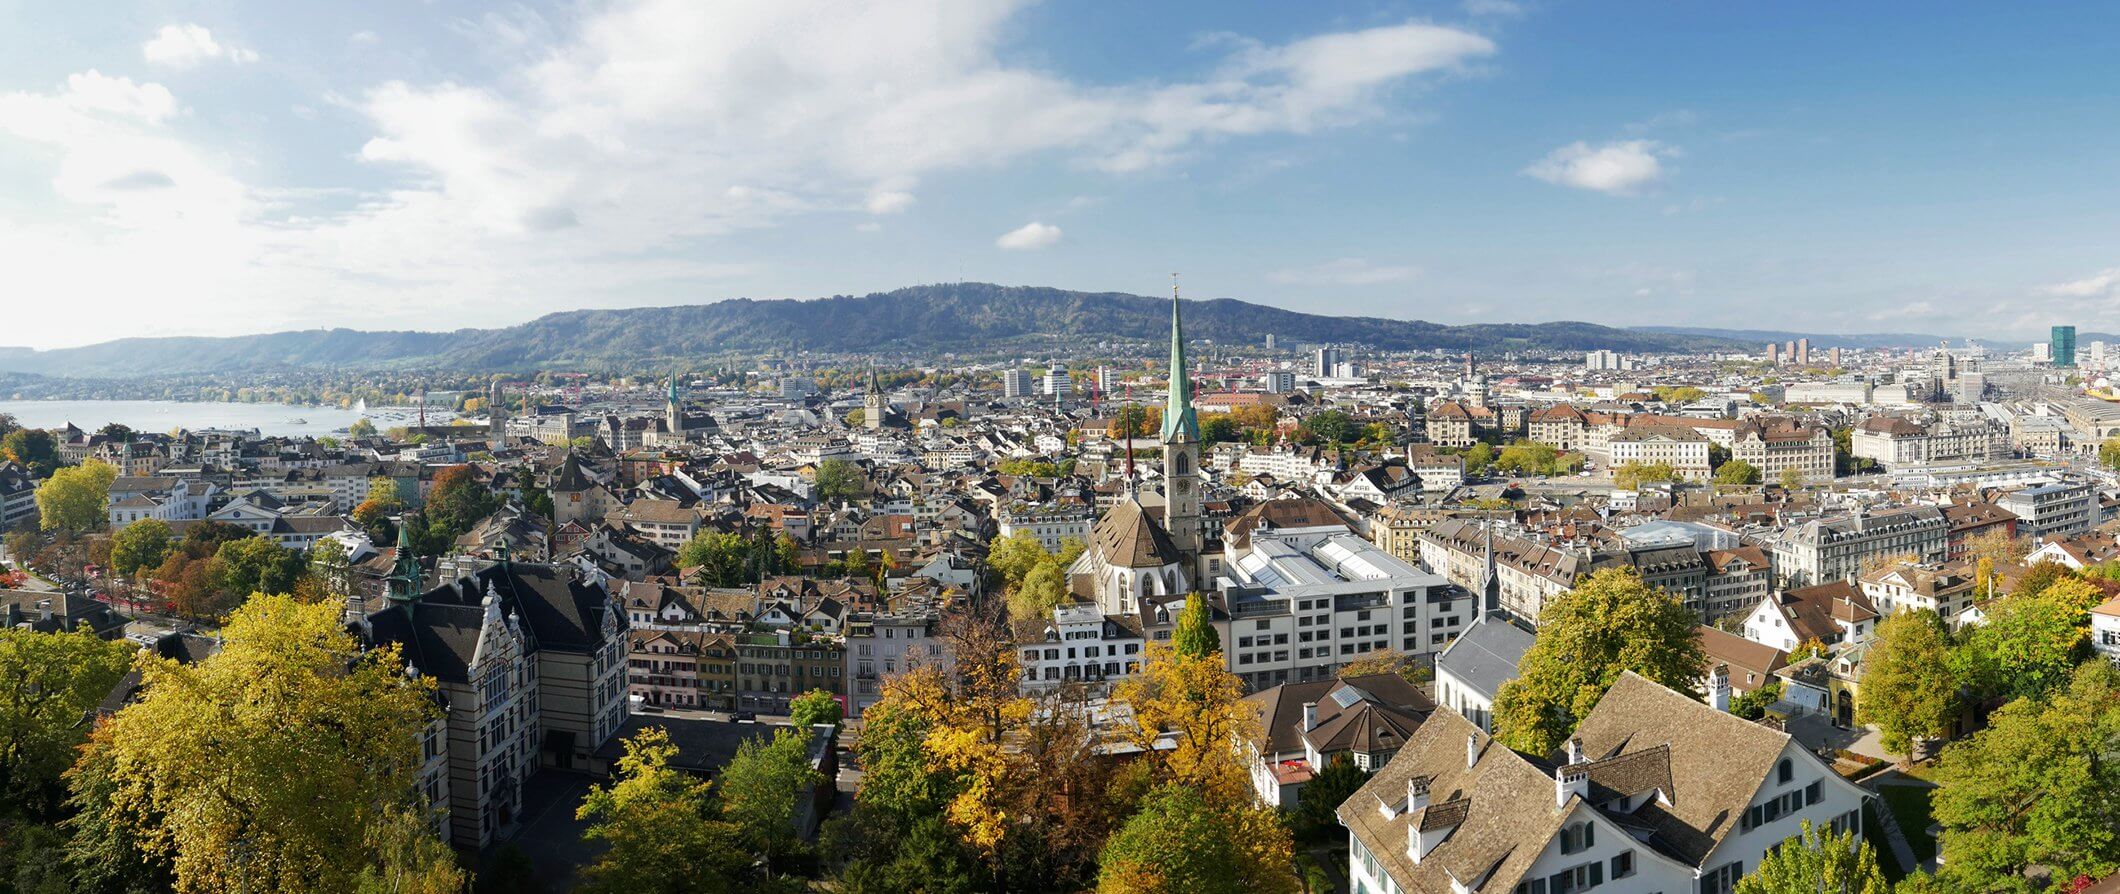 City view of Zurich taken from above